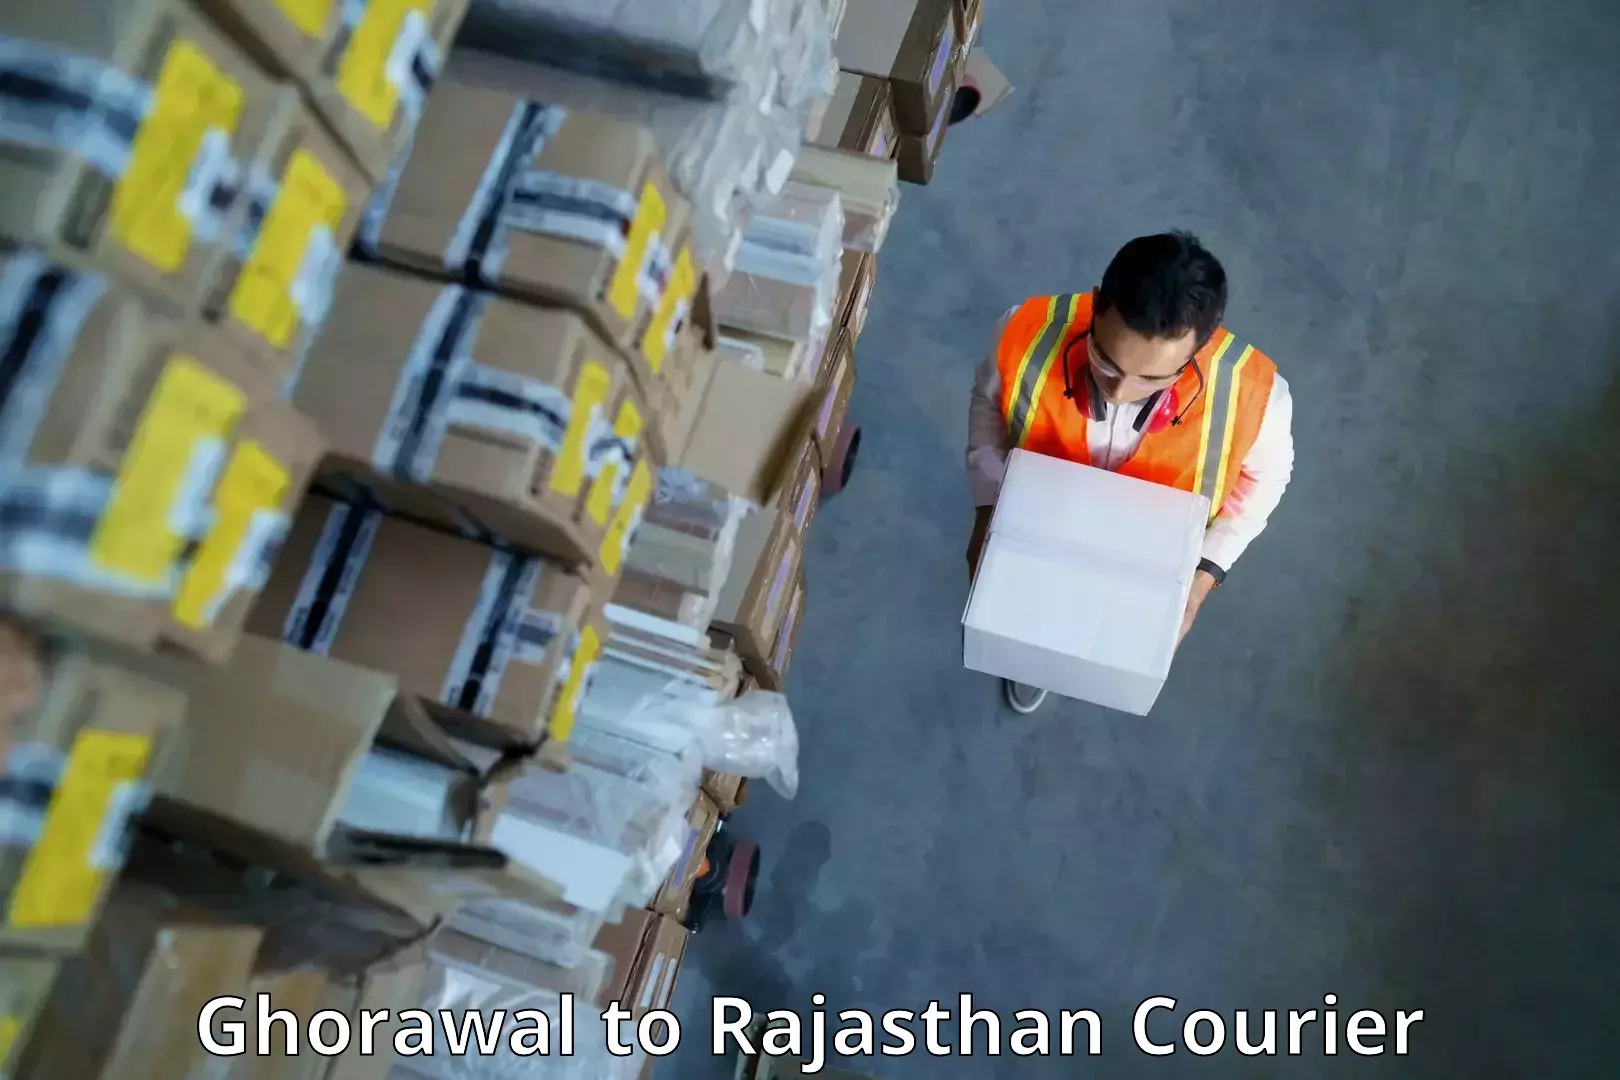 24/7 shipping services Ghorawal to Alwar